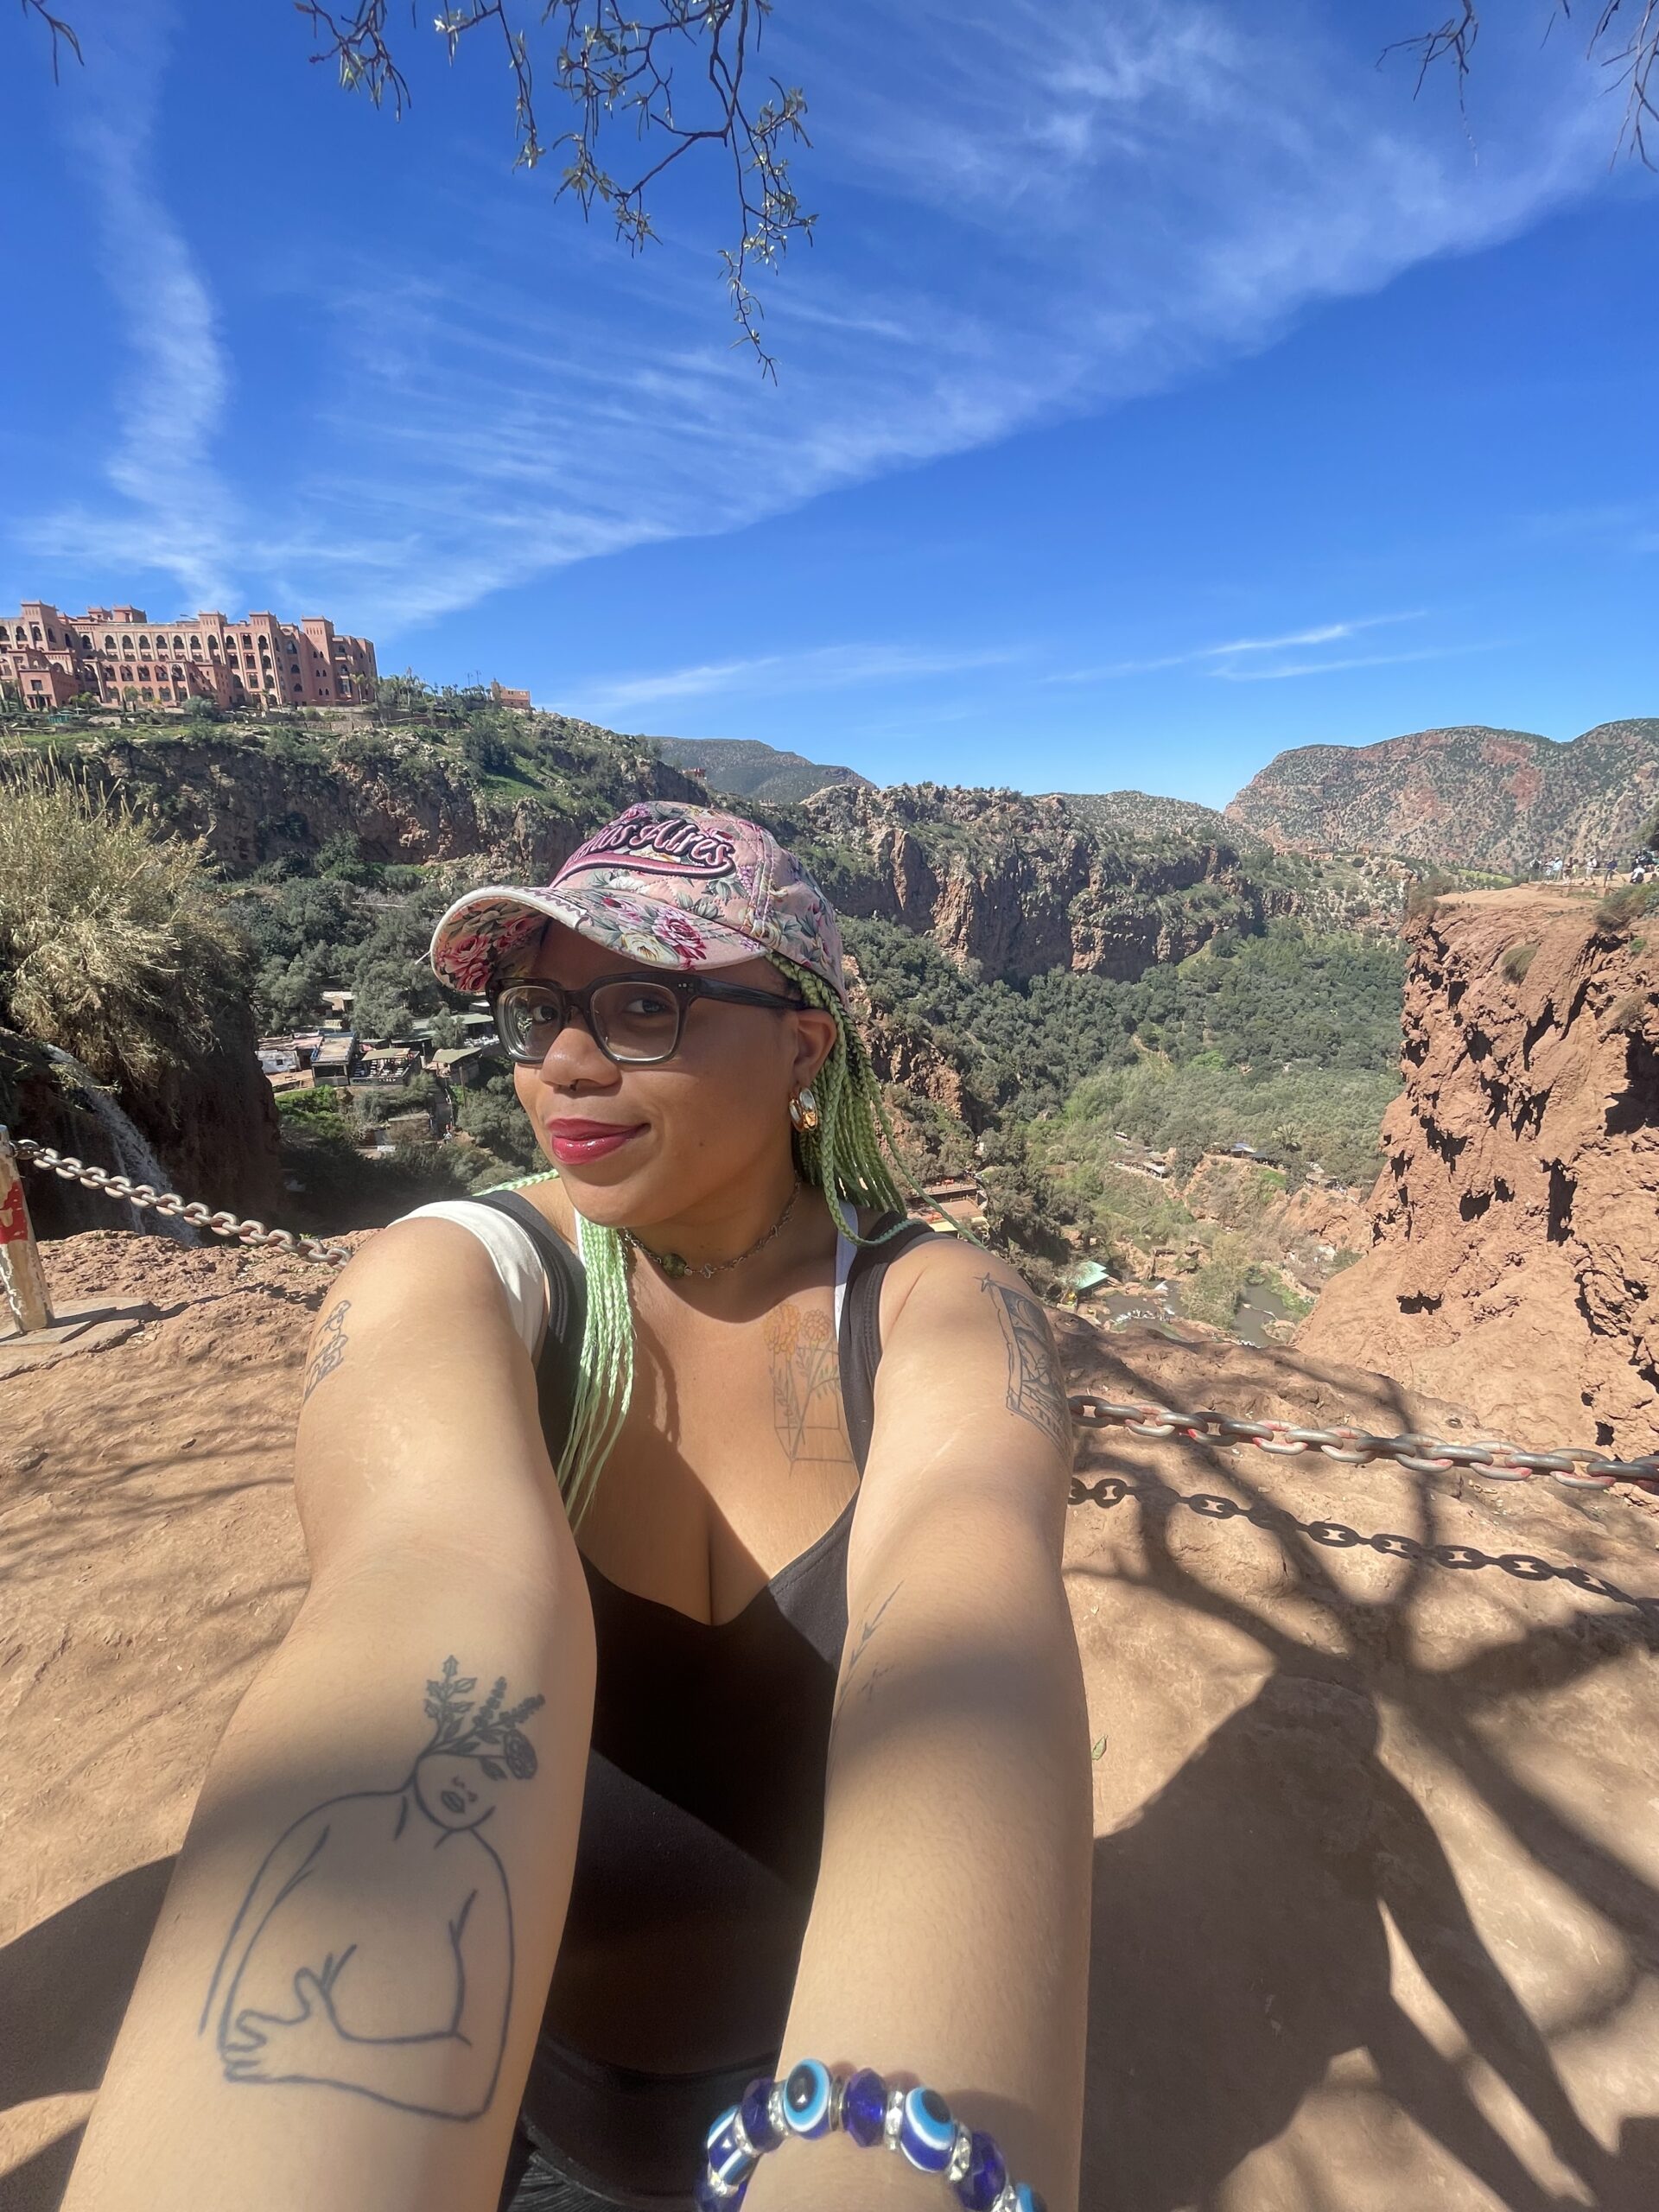 A Black woman, wearing a hat that reads “Buenos Aires,” takes a selfie in front of a mountainous backdrop.